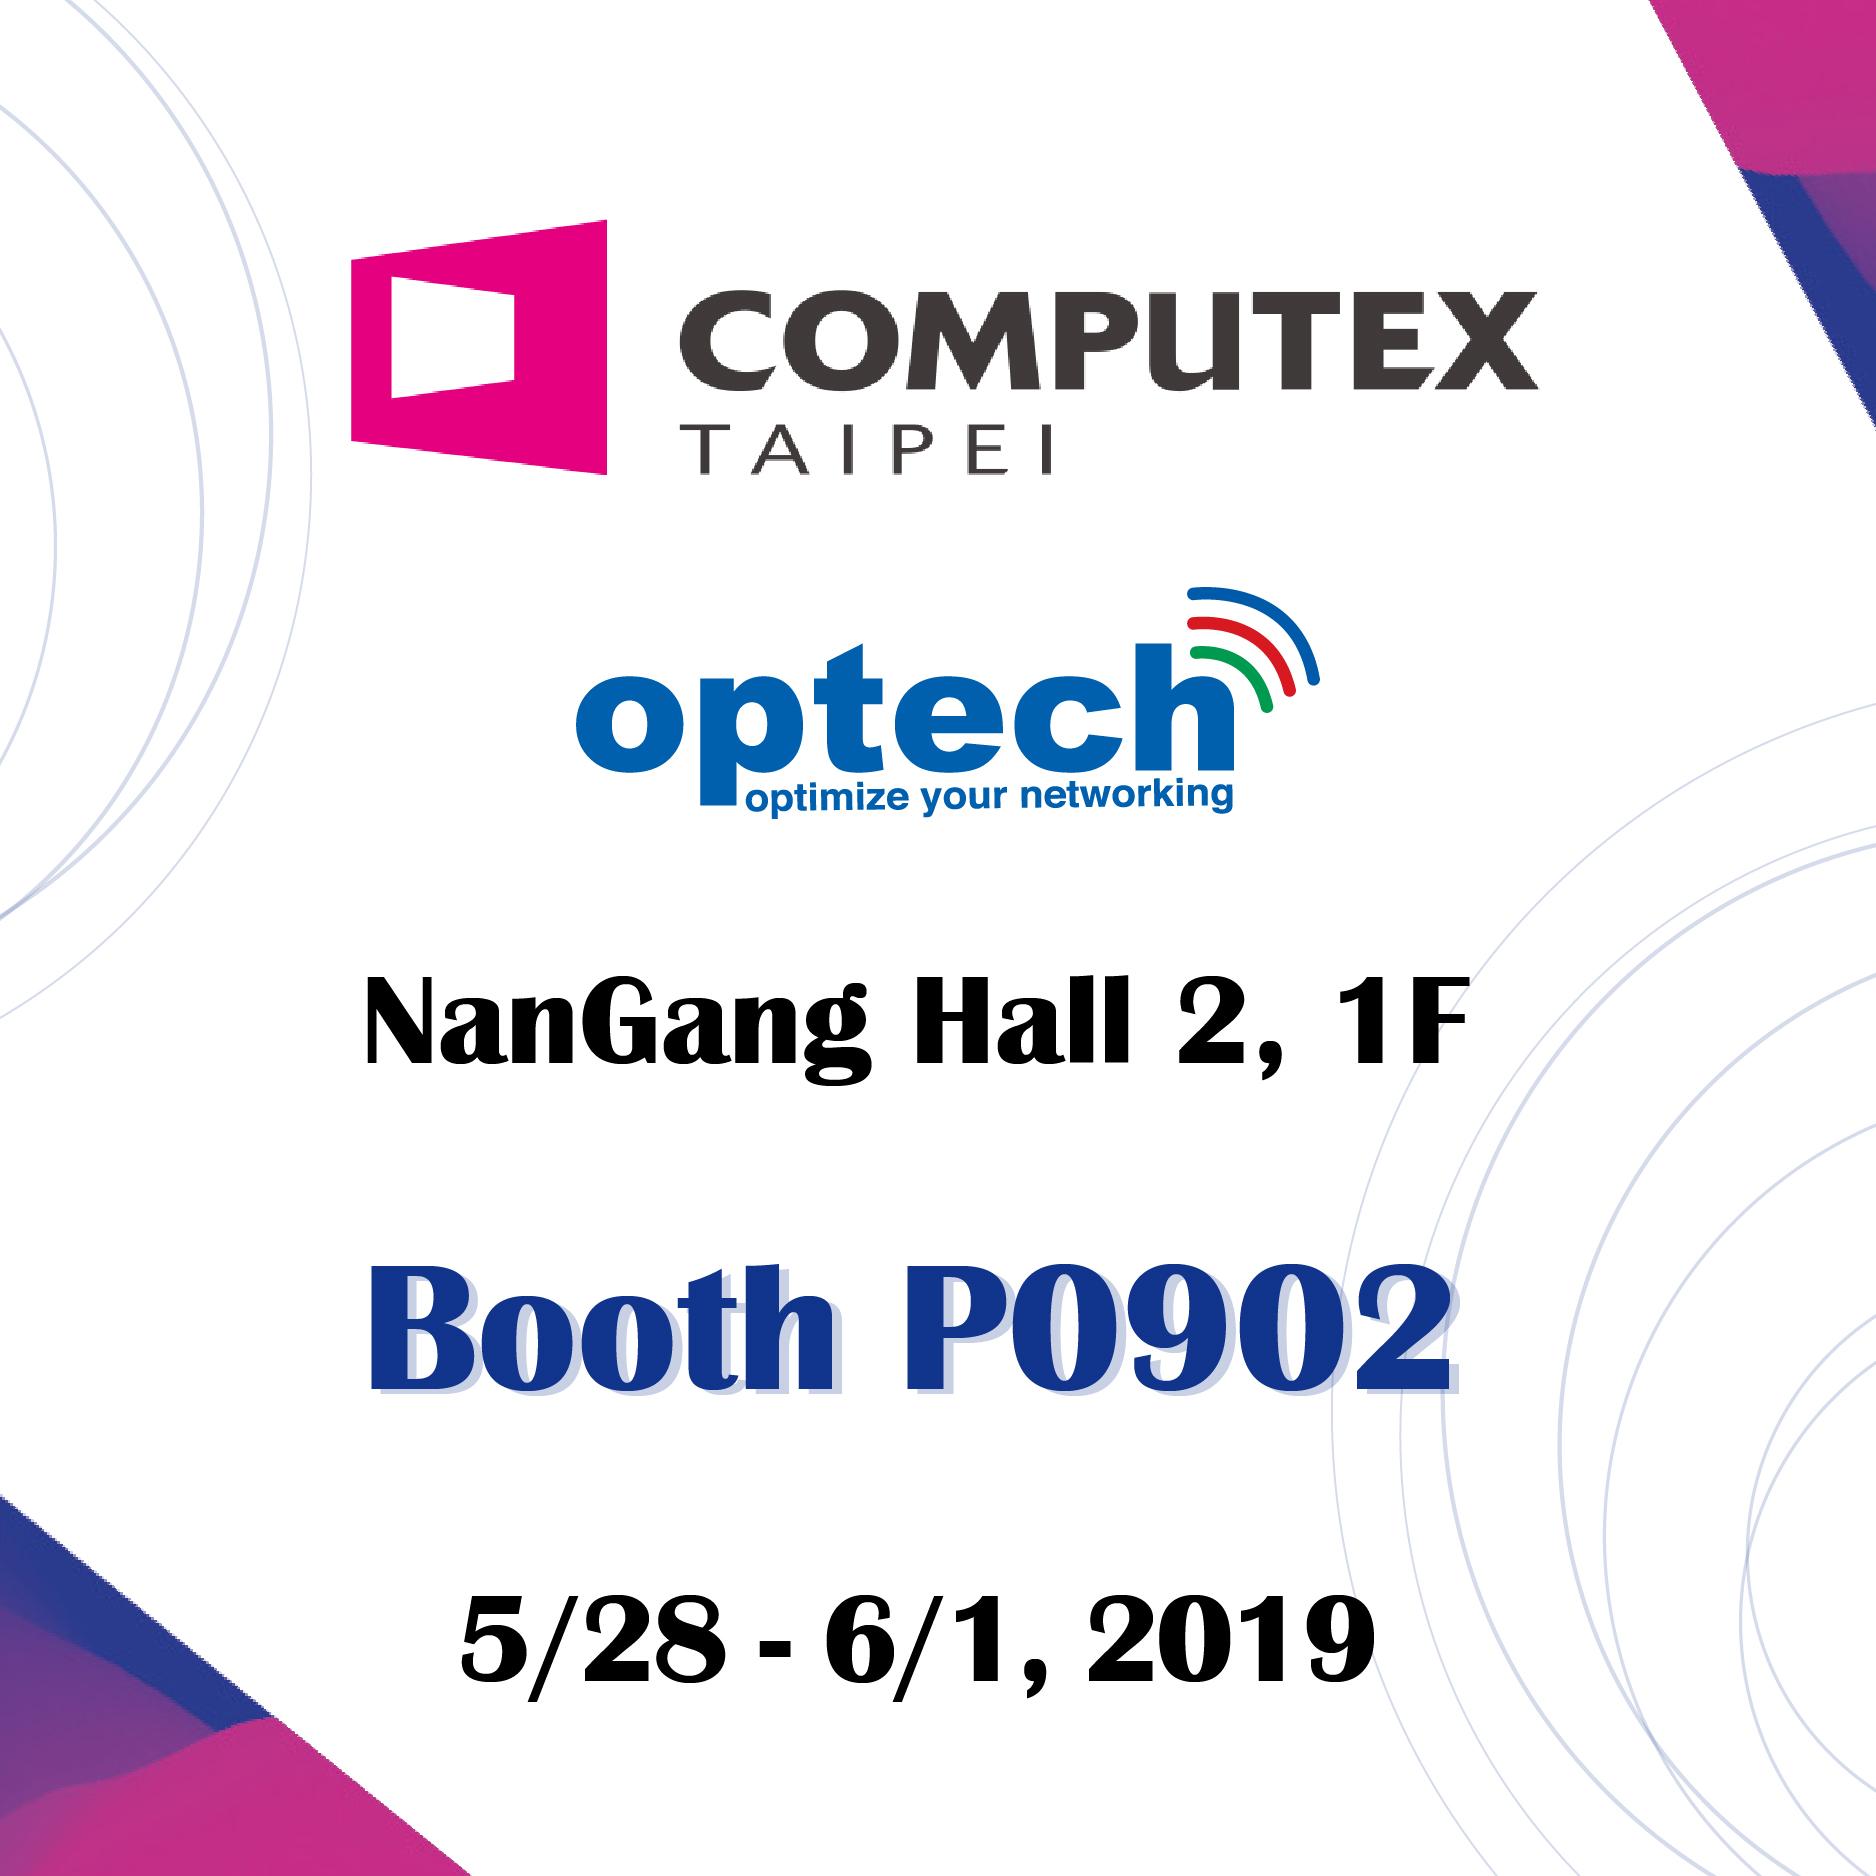 You are currently viewing Join Optech at Computex 2019